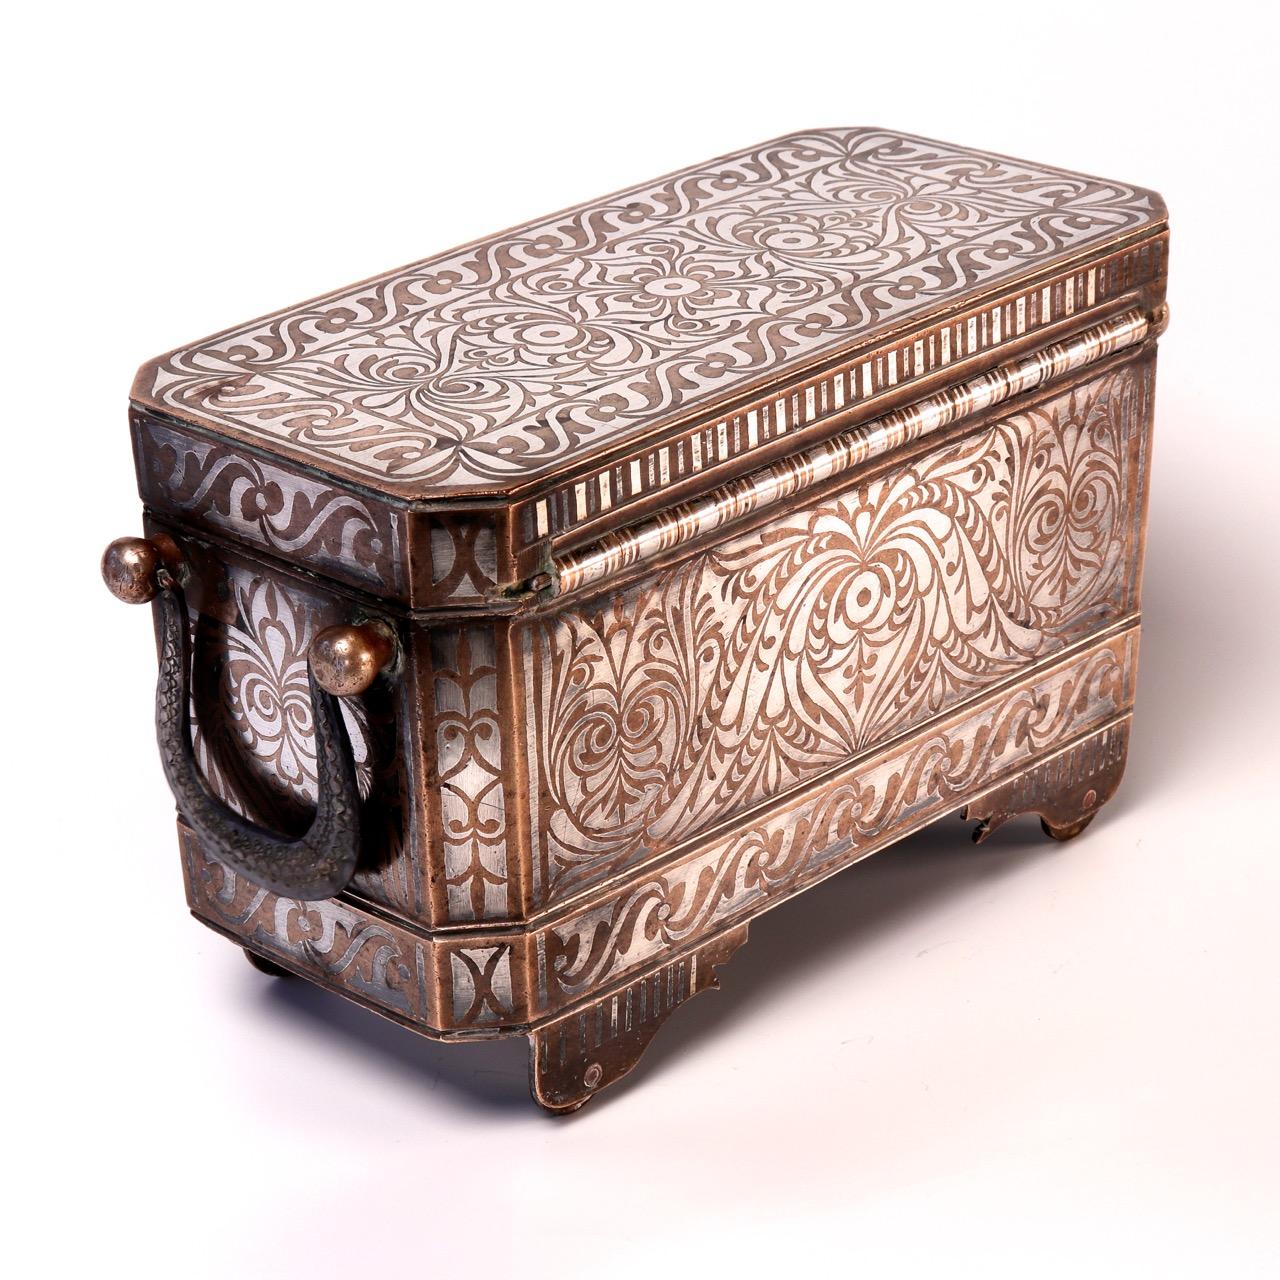 Cast Southern Philippine ‘Mindanao’ Brass with Silver Inlay Betel Box